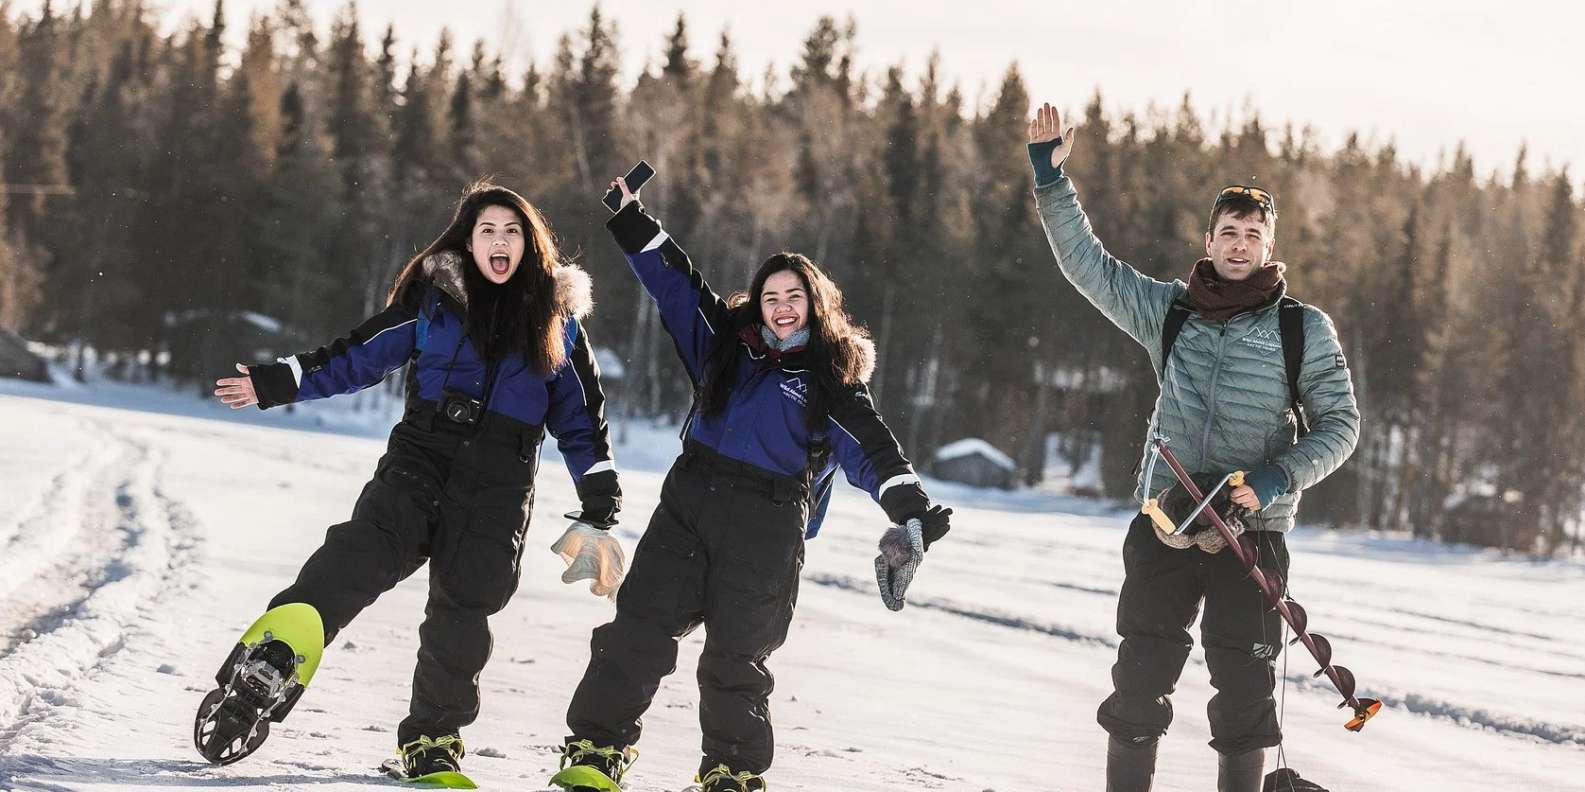 From Rovaniemi: Snowshoeing and Ice Fishing Tour